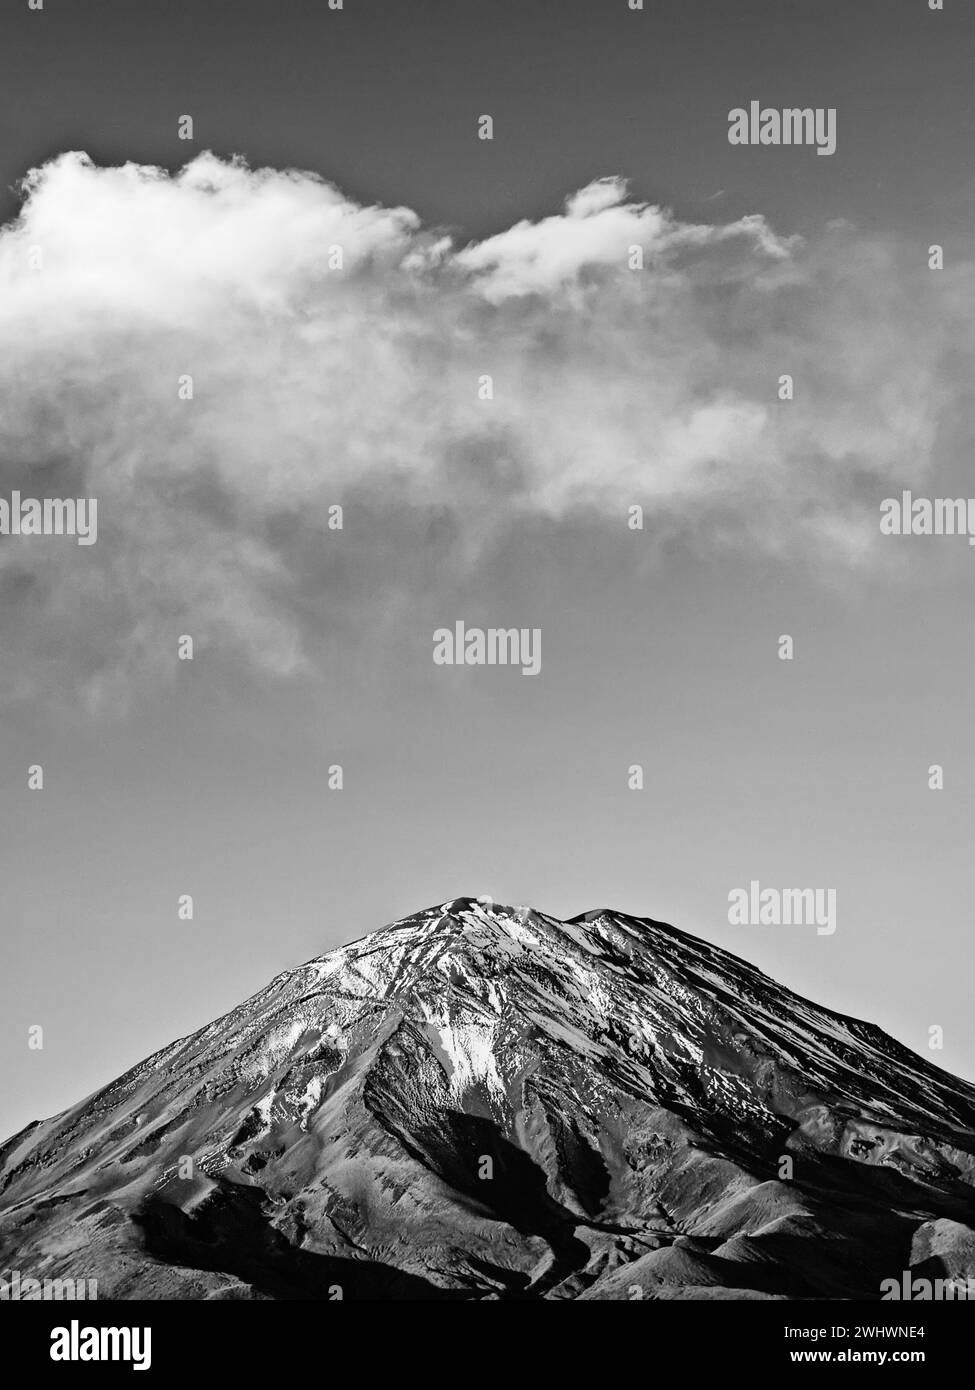 Black and white photograph of the snow-capped Peruvian volcano Misti from the town of Arequipa with clouds above. Peru. Stock Photo